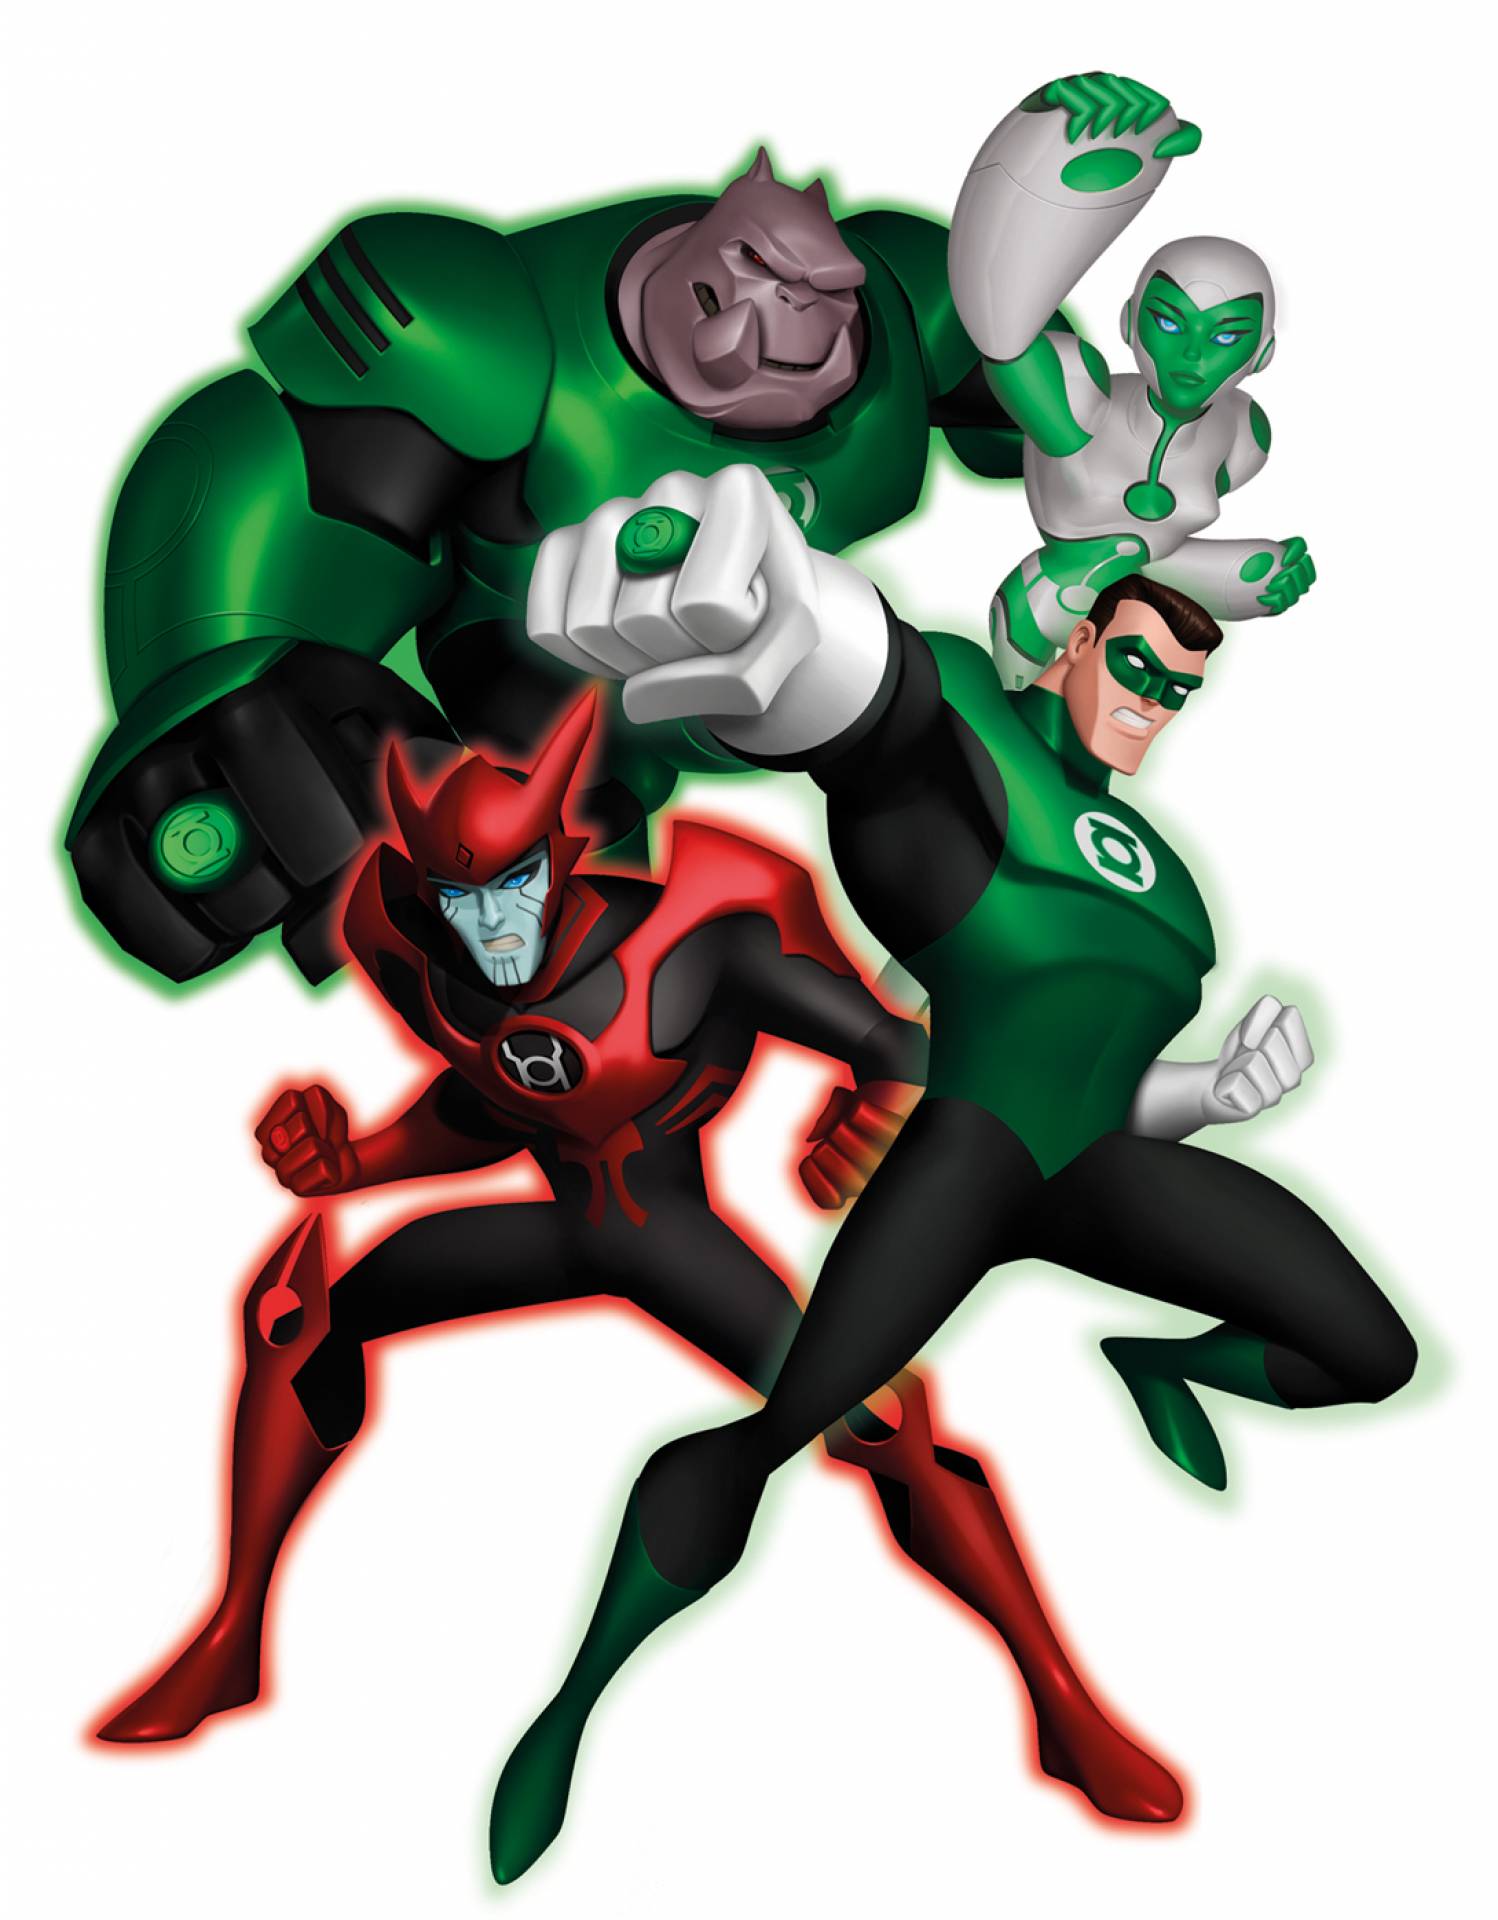 Green Lantern: The Animated Series Backgrounds, Compatible - PC, Mobile, Gadgets| 1498x1920 px